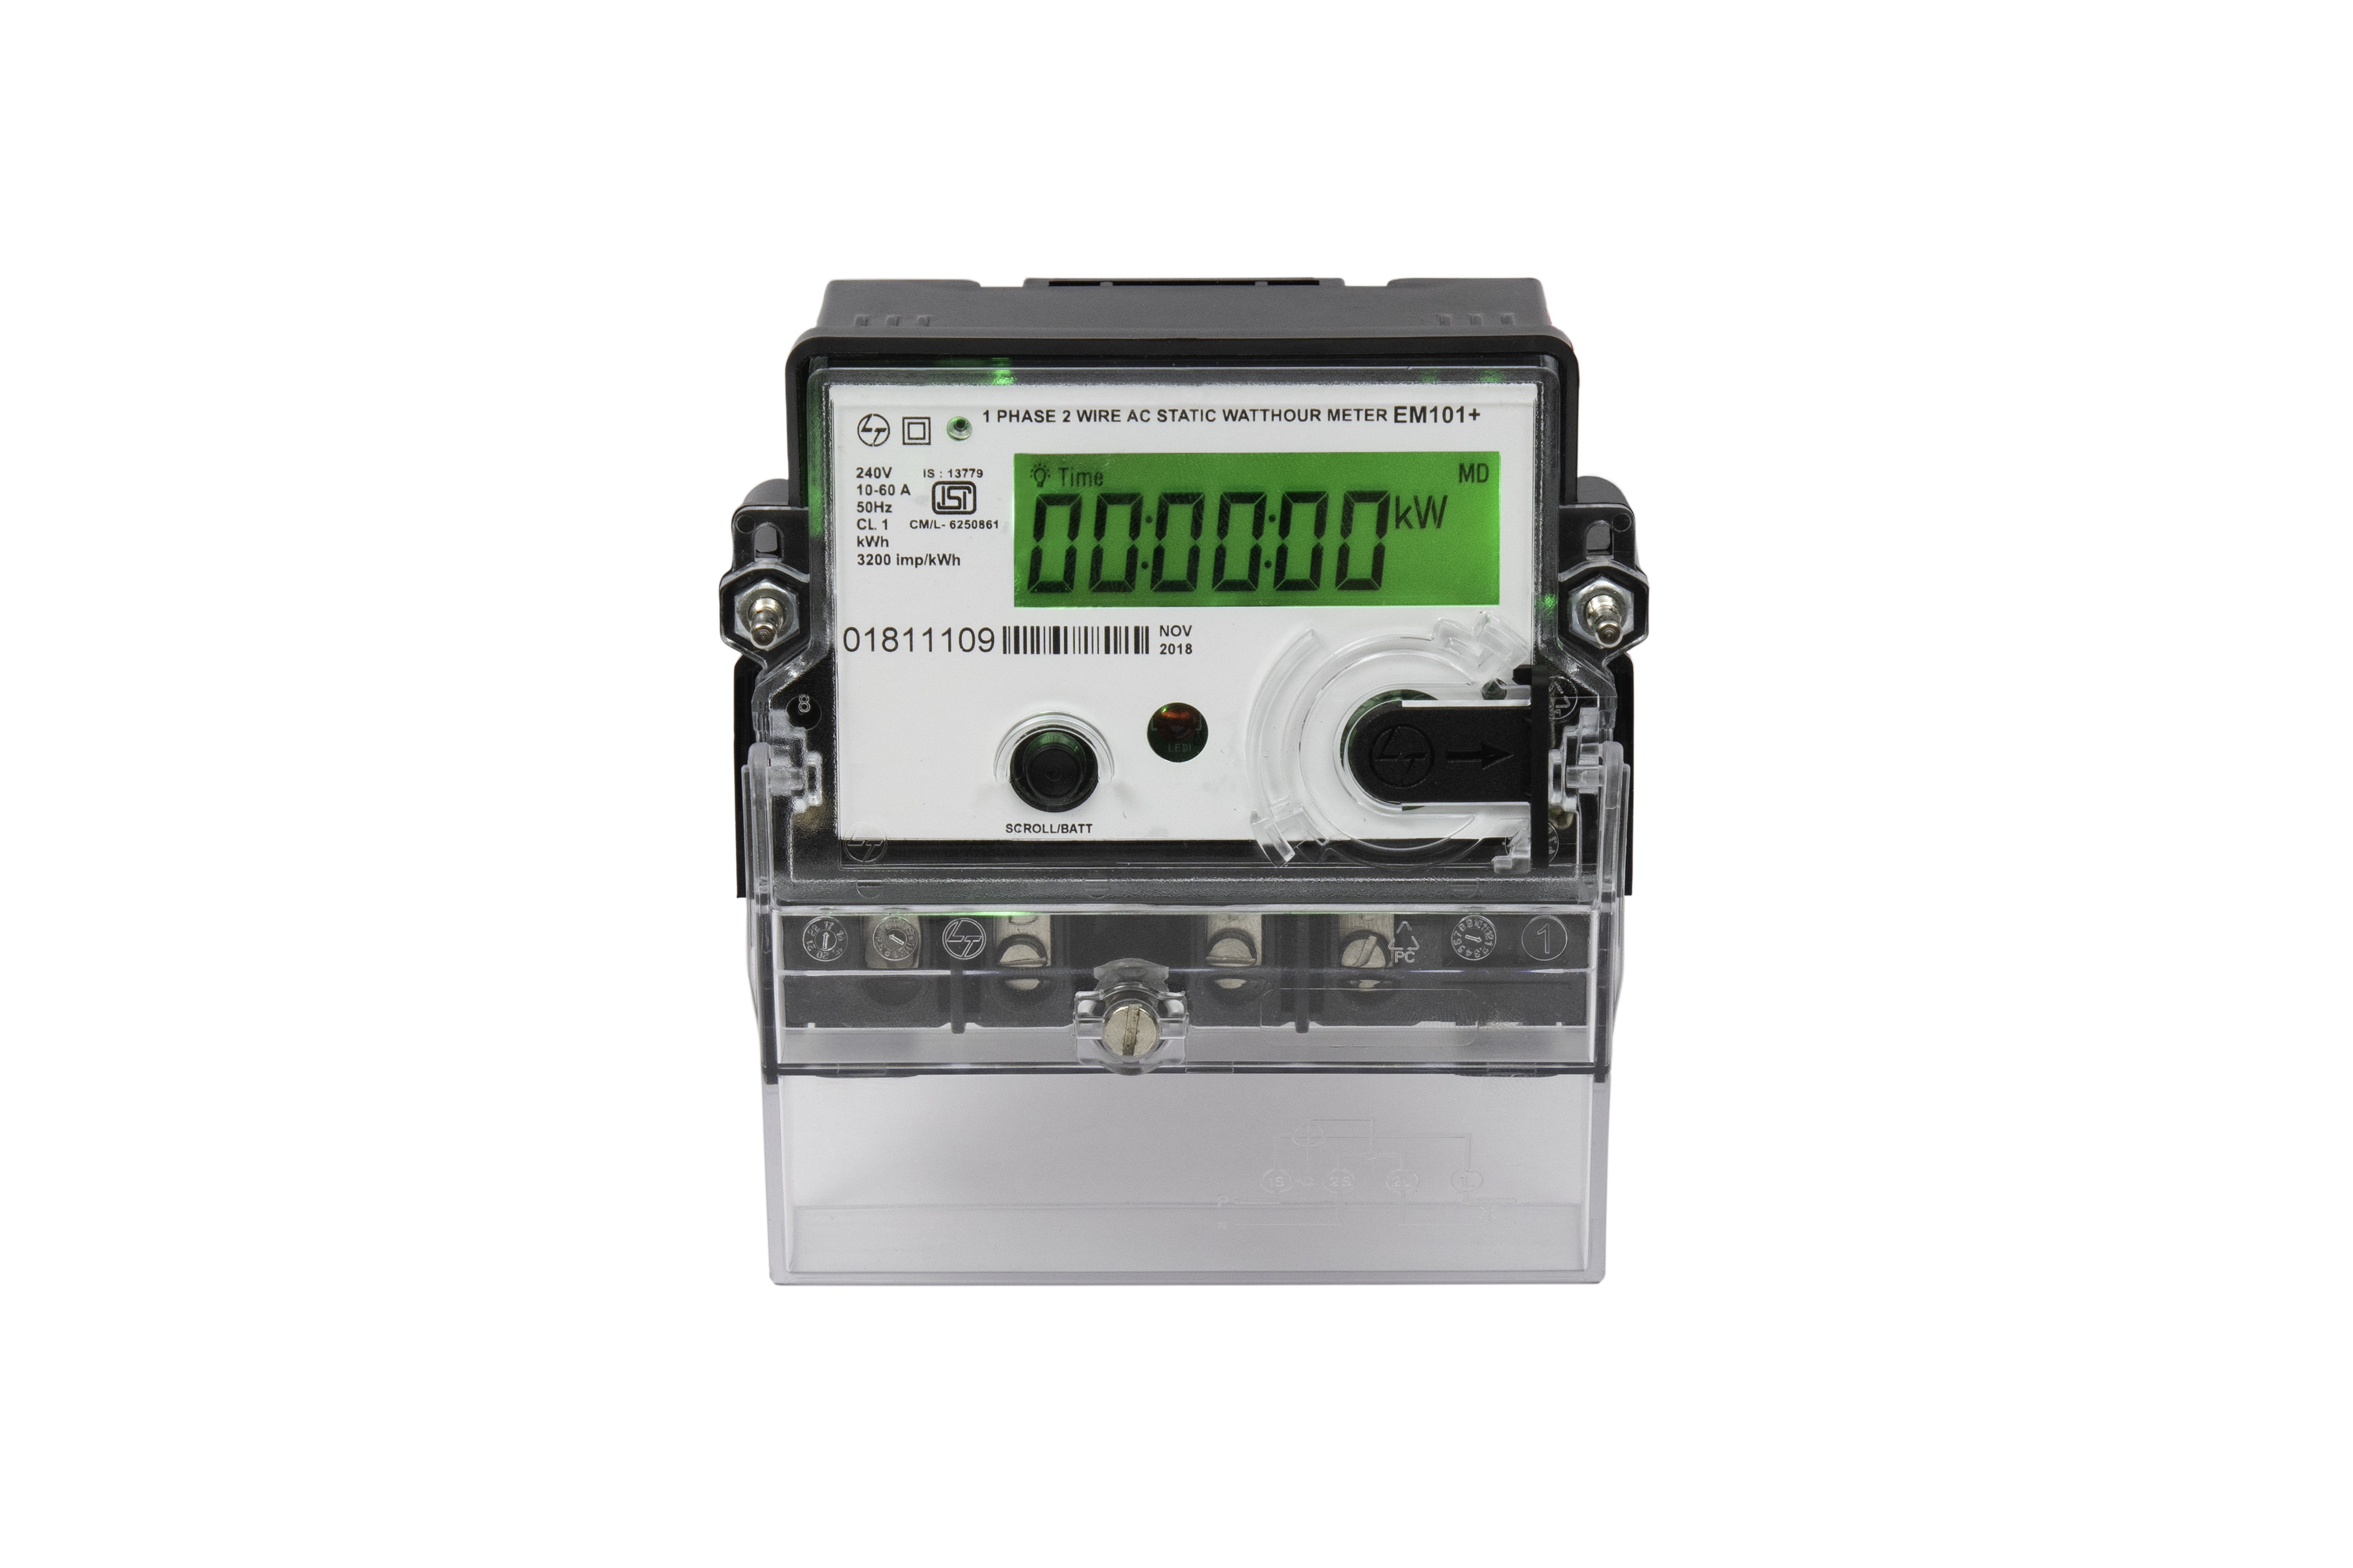 streepje Maakte zich klaar Toestemming Single Phase Whole Current Energy Meter | Residential & Commercial Meters|  Meters | Products | Products & Services | Electrical & Automation